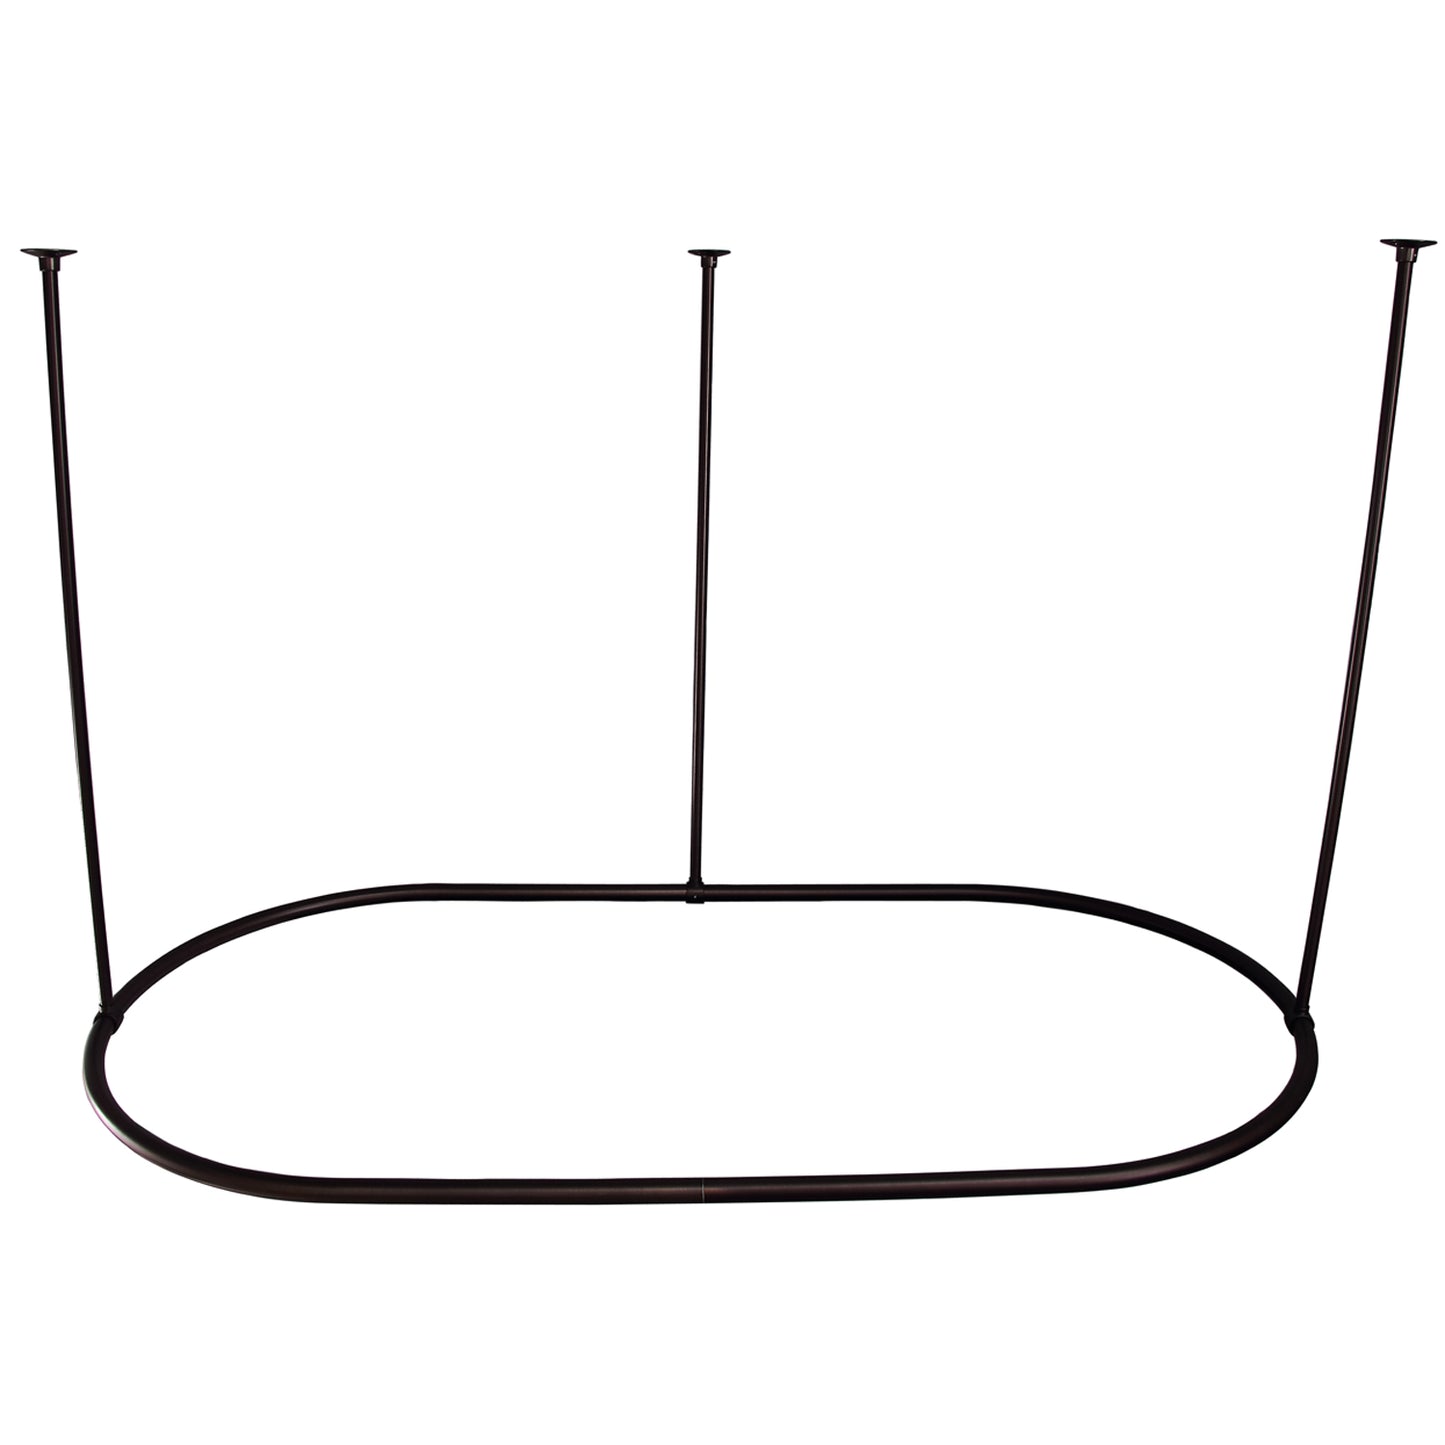 72" x 36" Oval Shower Curtain Ring in Oil Rubbed Bronze